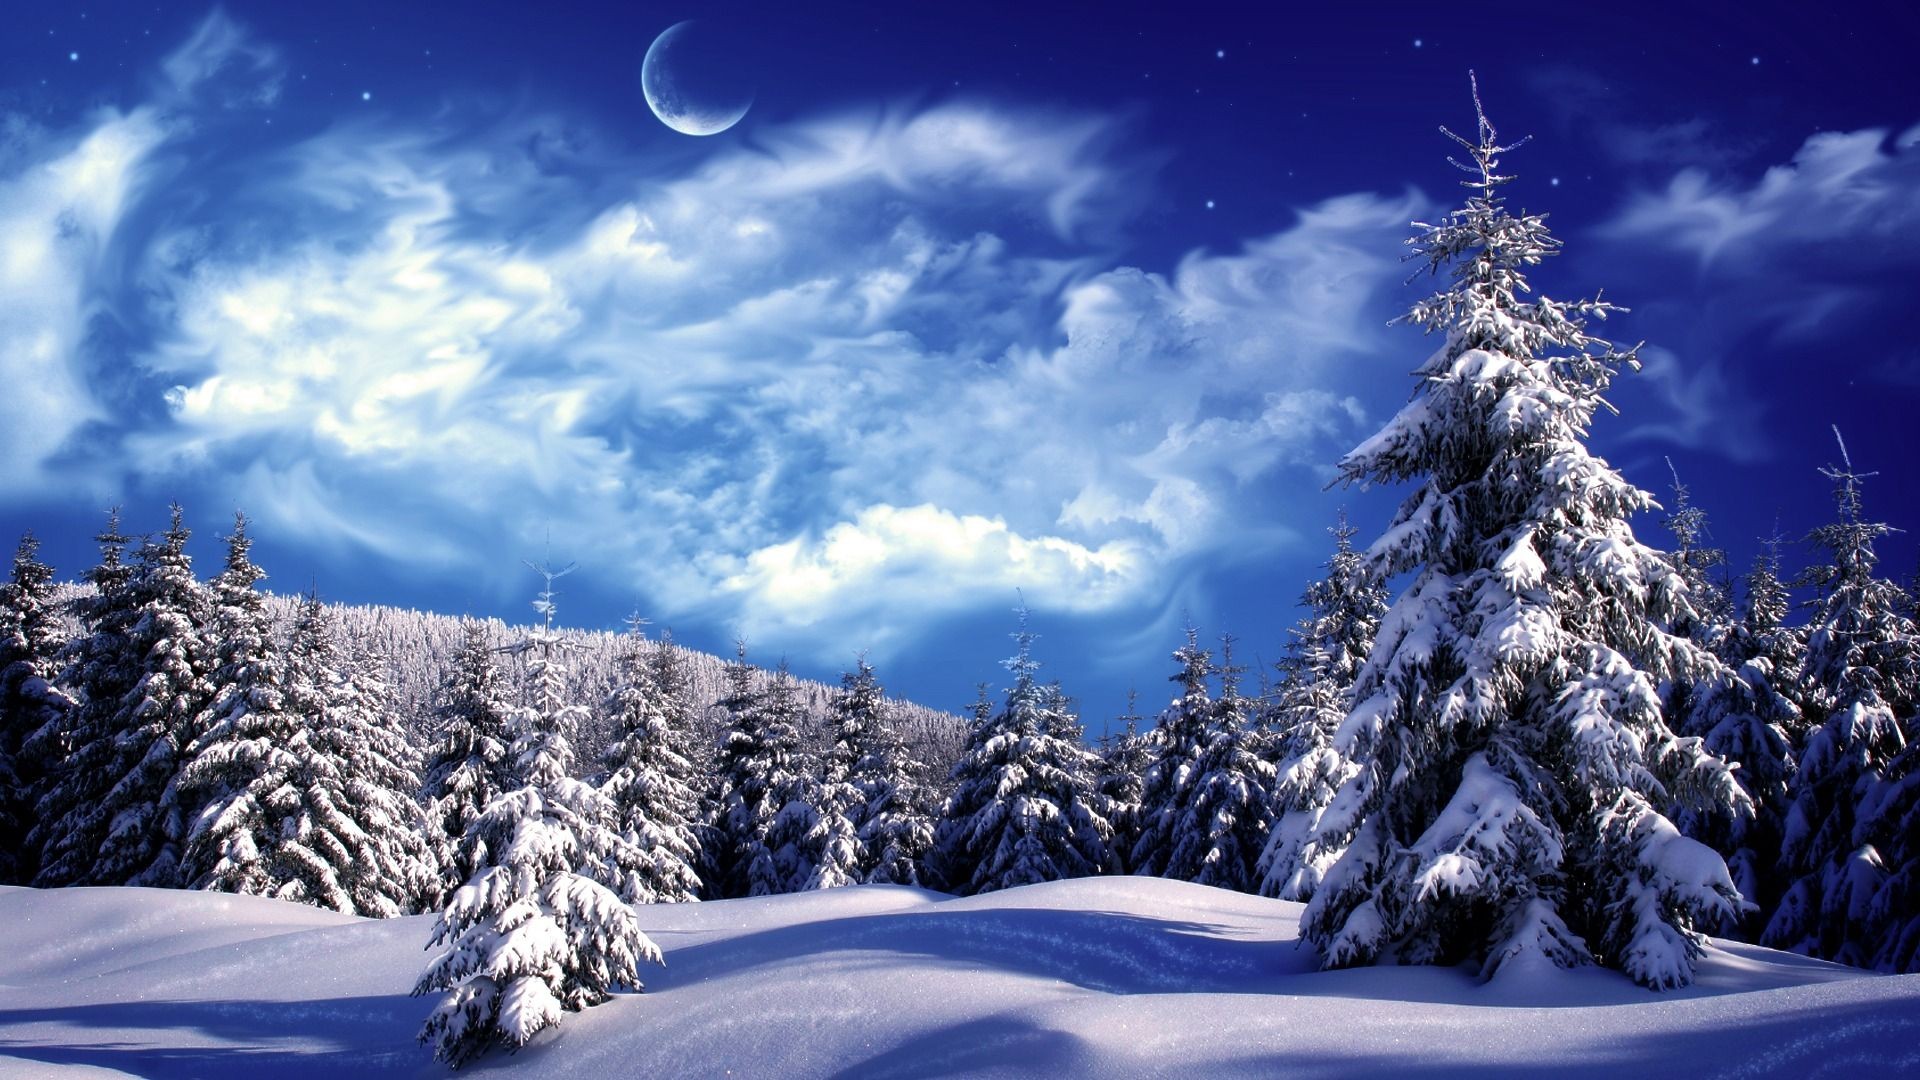 Snowy Forest wallpaper 1080p